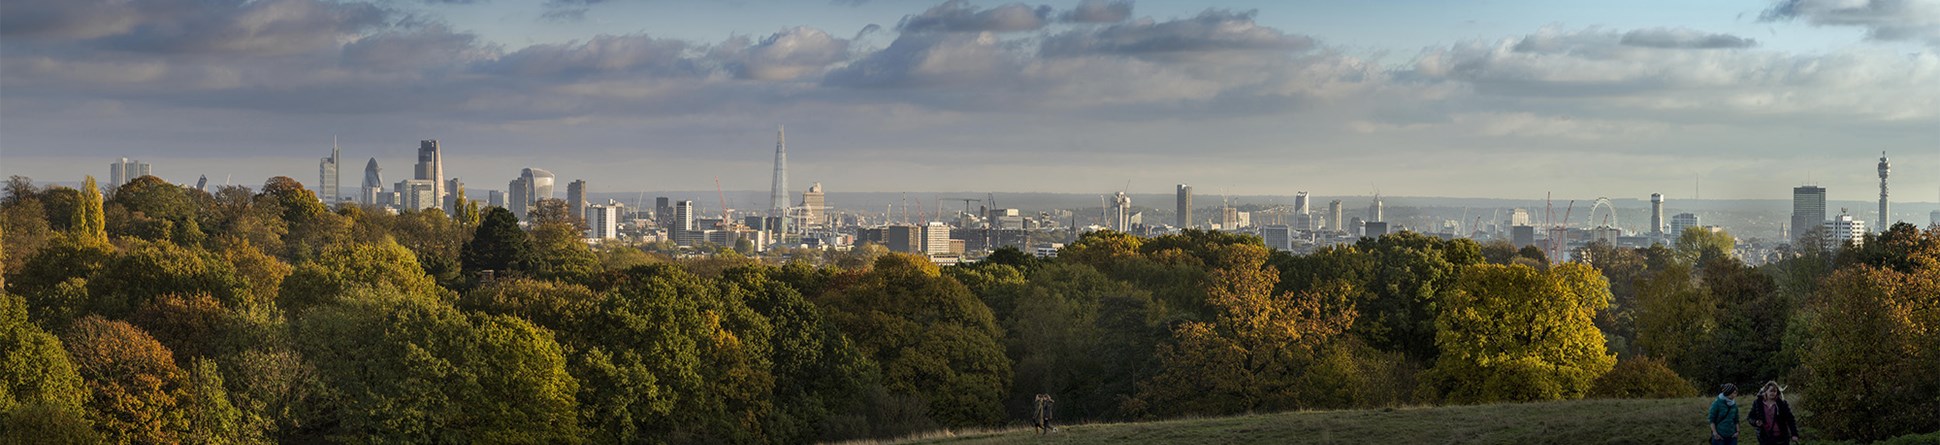 General view of the London and Westminster skyline looking south from the grounds of Kenwood House